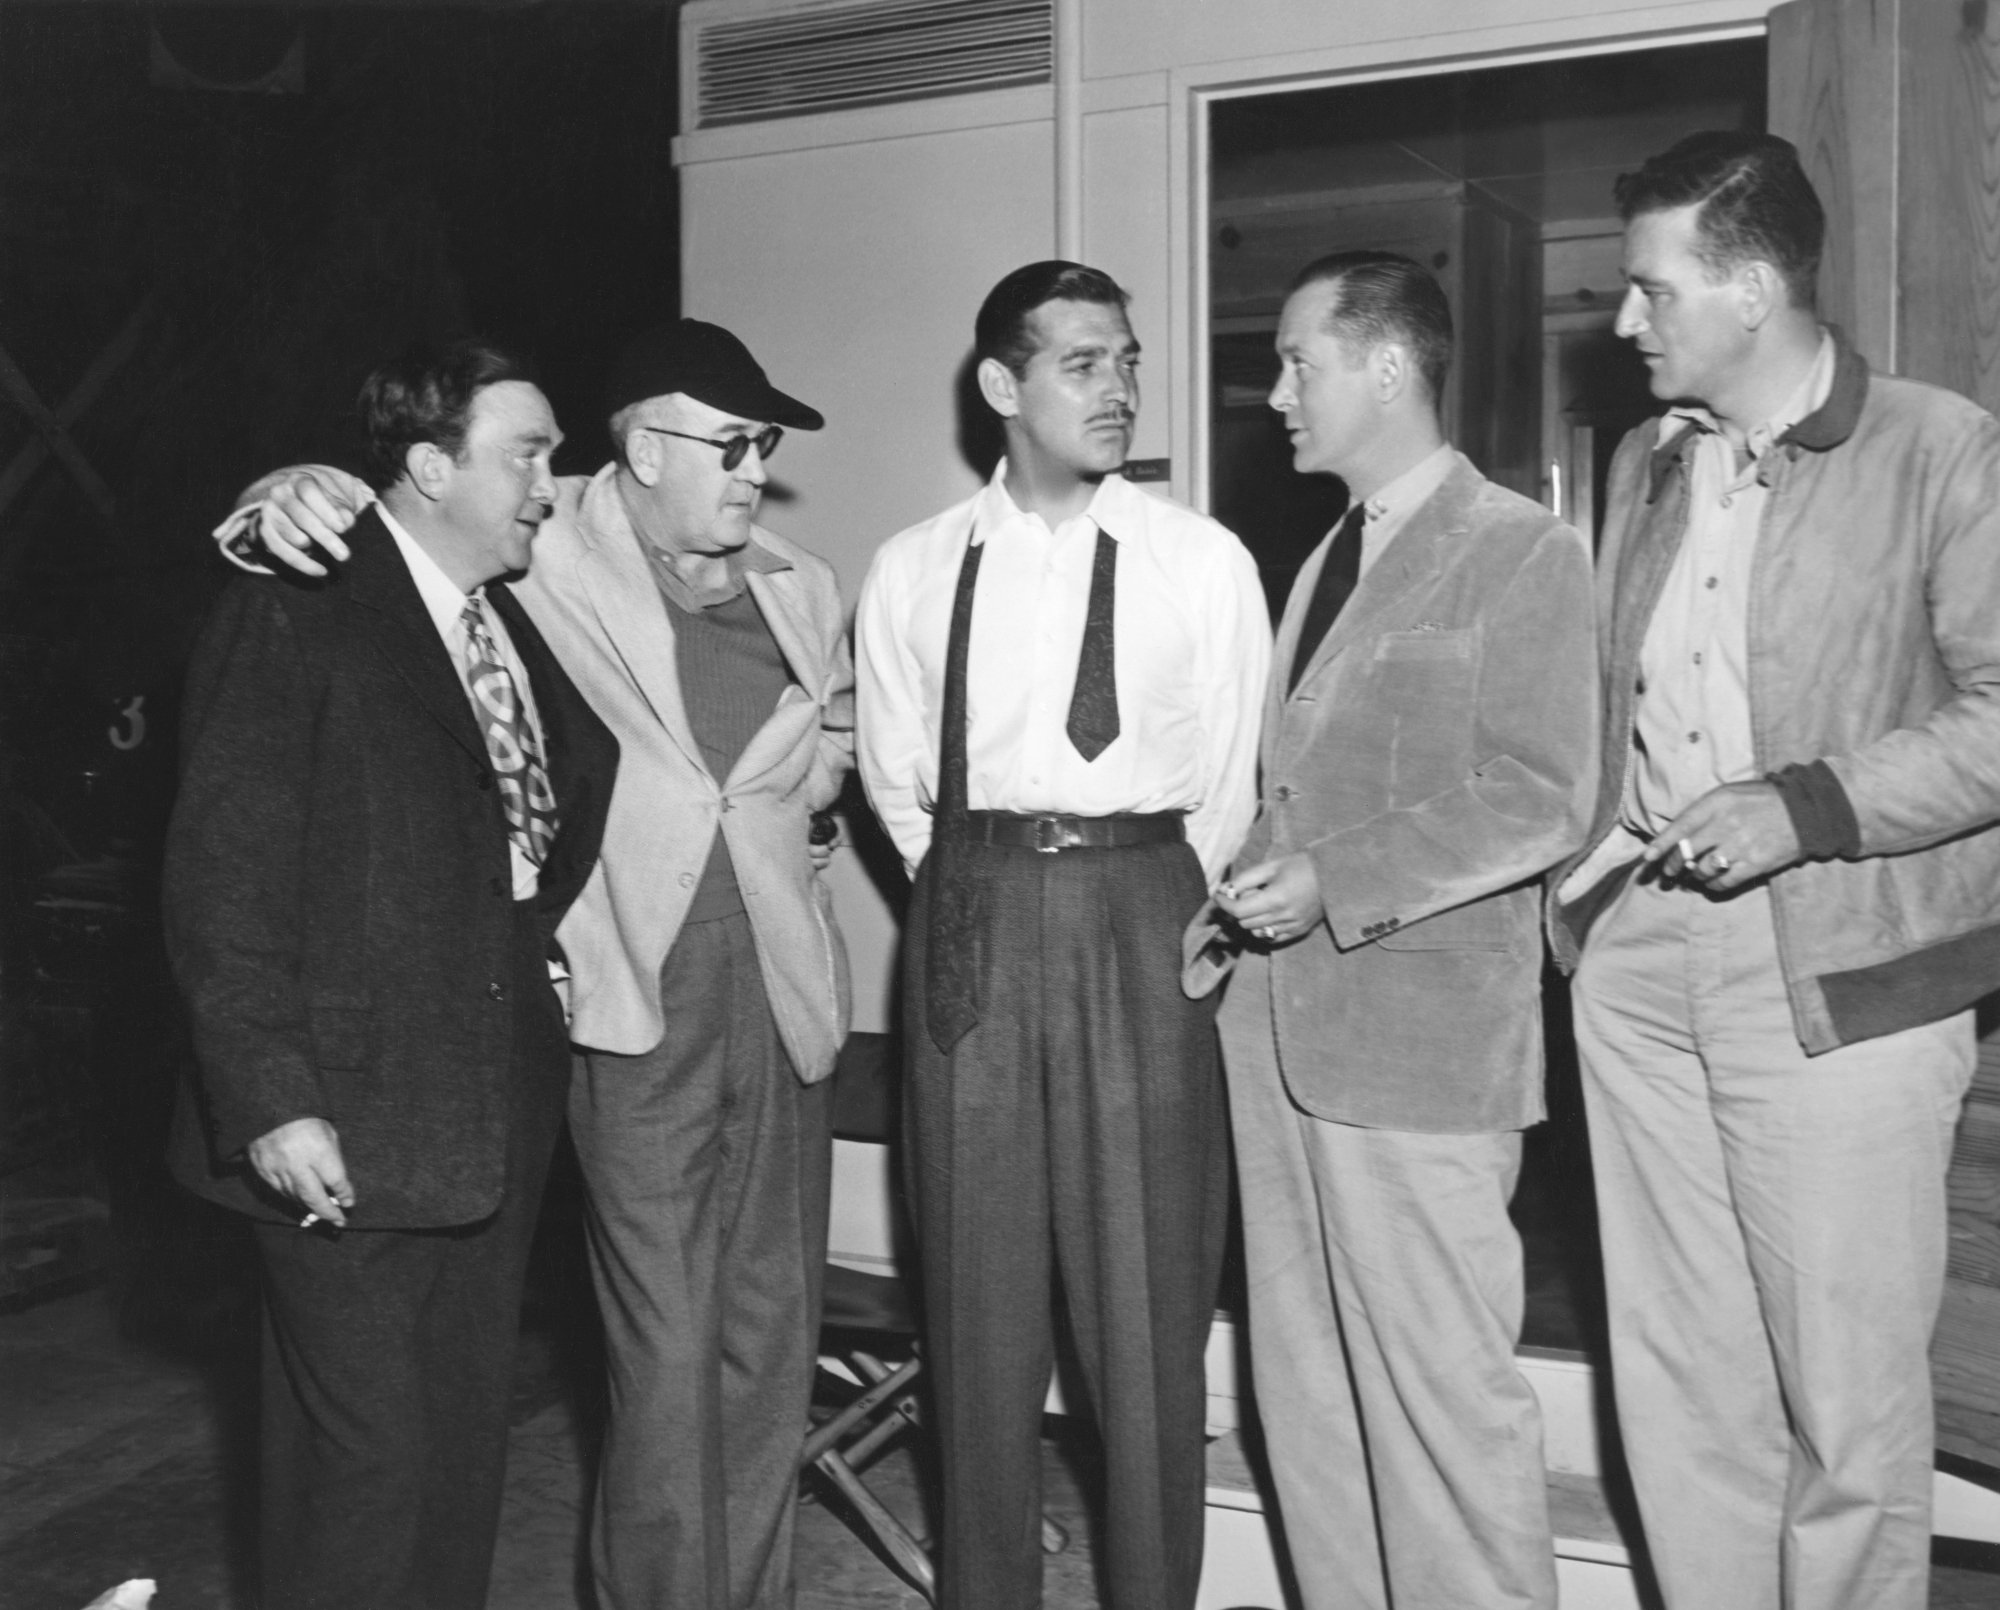 Thomas Mitchell, John Ford, Clark Gable, Robert Montgomery, and John Wayne standing around on the set wearing suits and smoking cigarettes